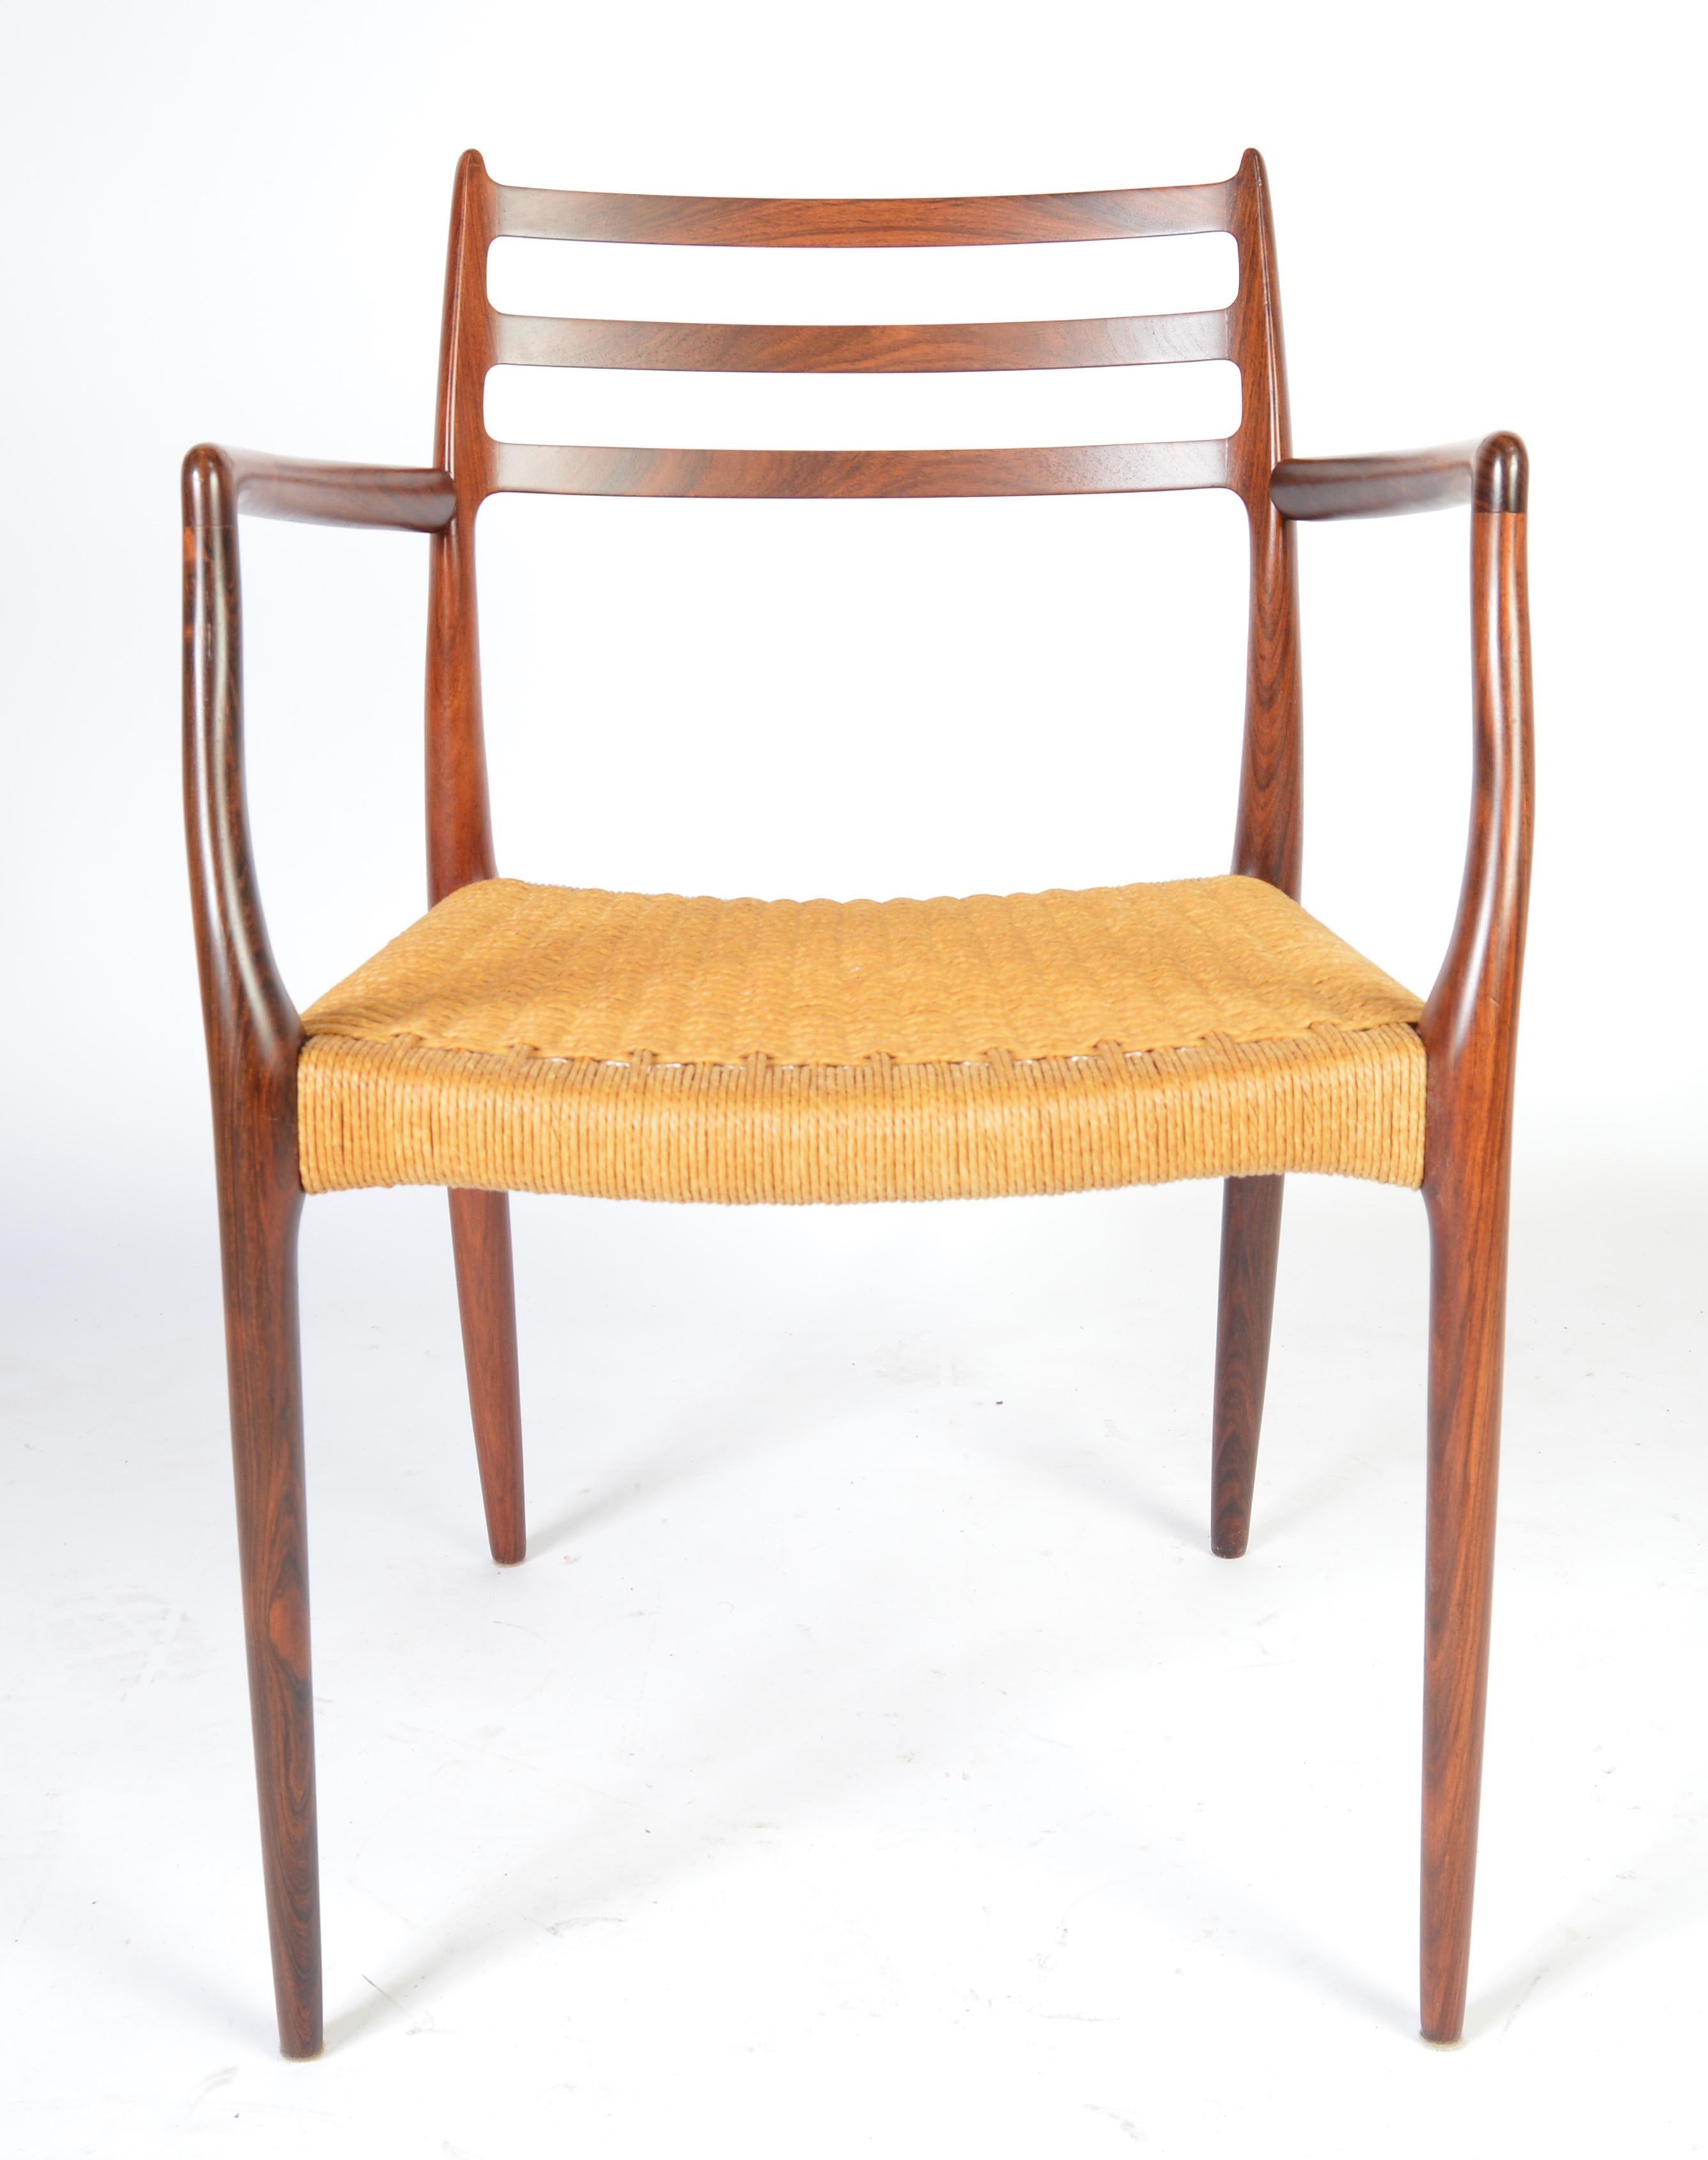 Vintage and nearly immaculate Niels Moller model 62 rosewood armchair having no chips or scratches to frame and perfect rope corded seat. Signed.
Measures: 32 x 21 x 20